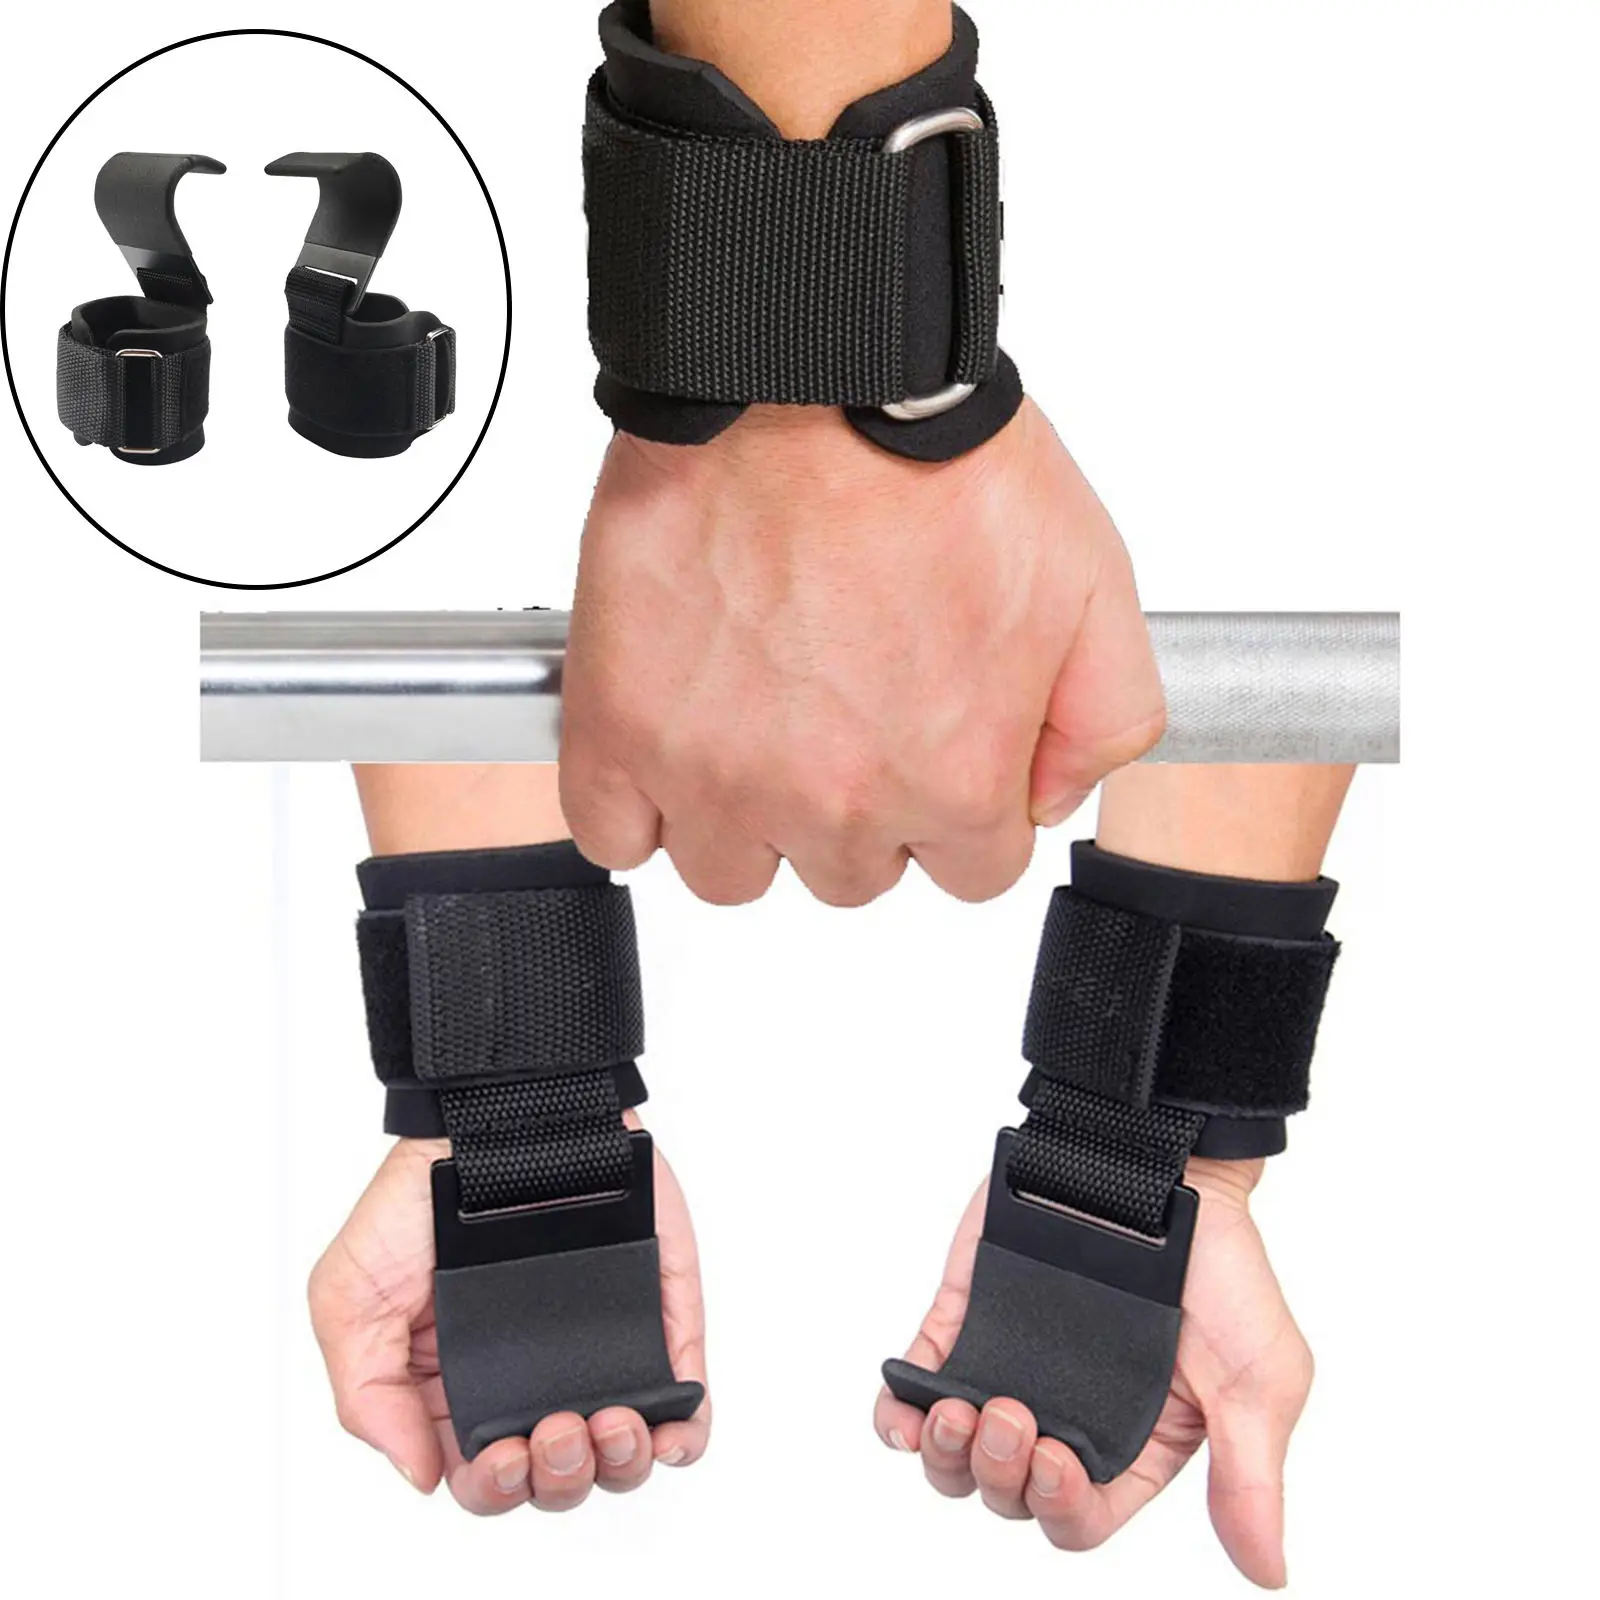 Details about   Austodex Weight lifting Hooks Gym Gloves wrist support wraps straps Grip pads 